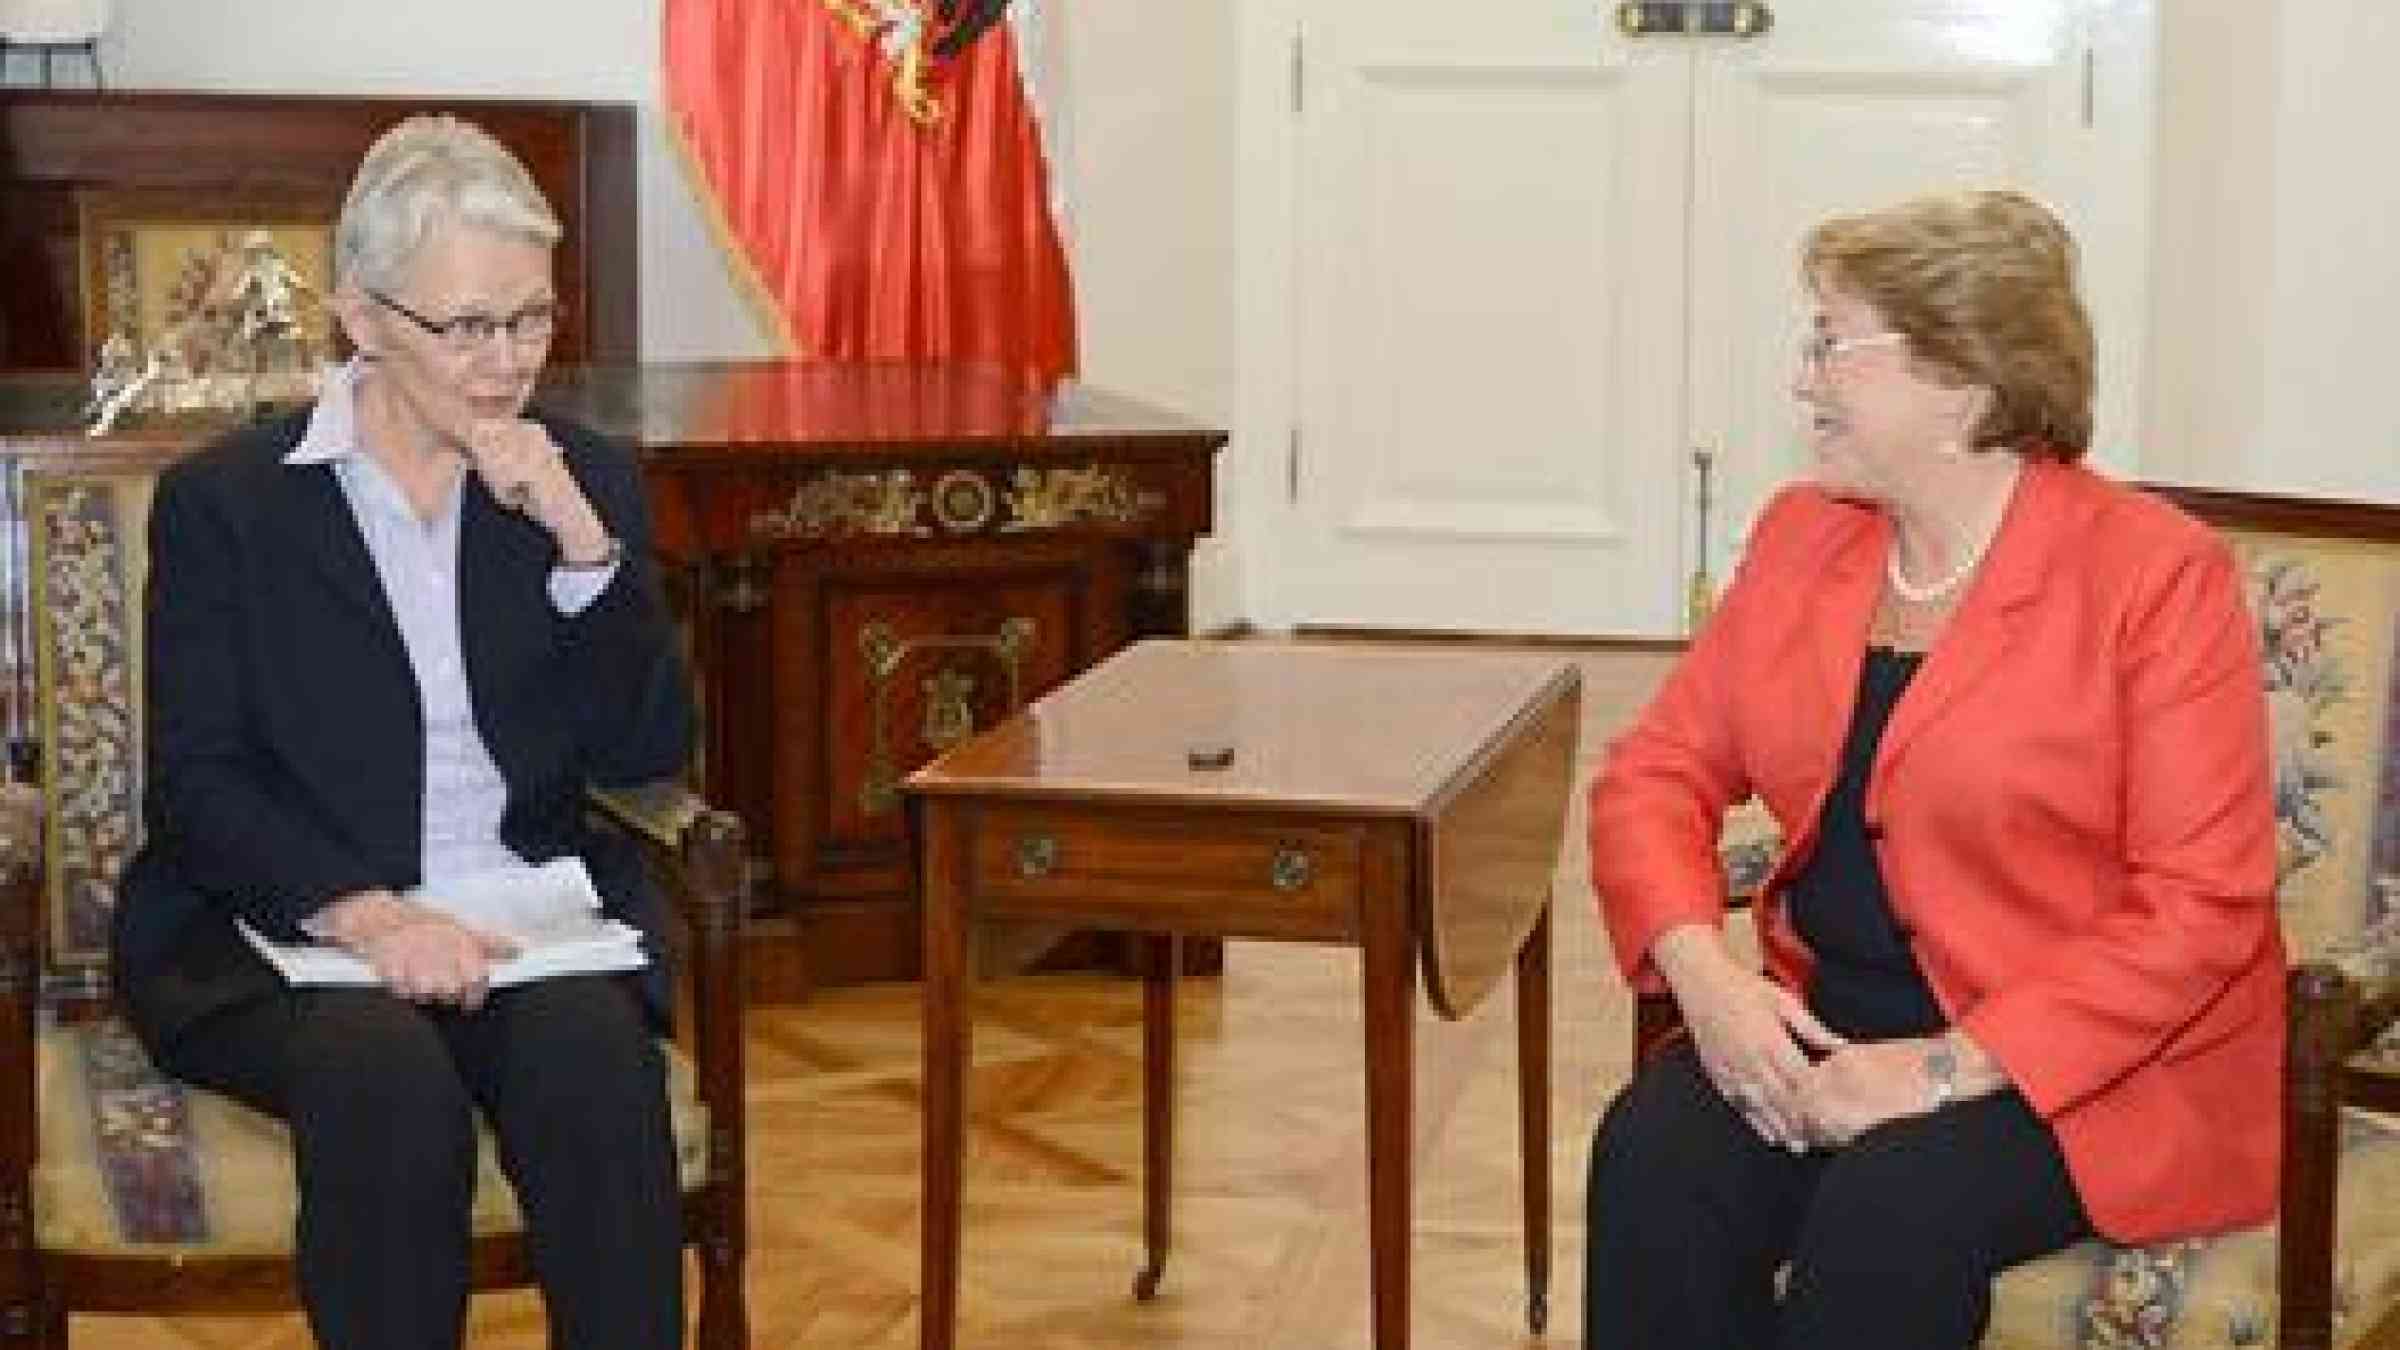 Margareta Wahlström, head of the UNISDR, met with Michelle Bachelet, President of Chile, yesterday and they discussed the country's disaster risk reduction efforts following two earthquakes earlier this month.